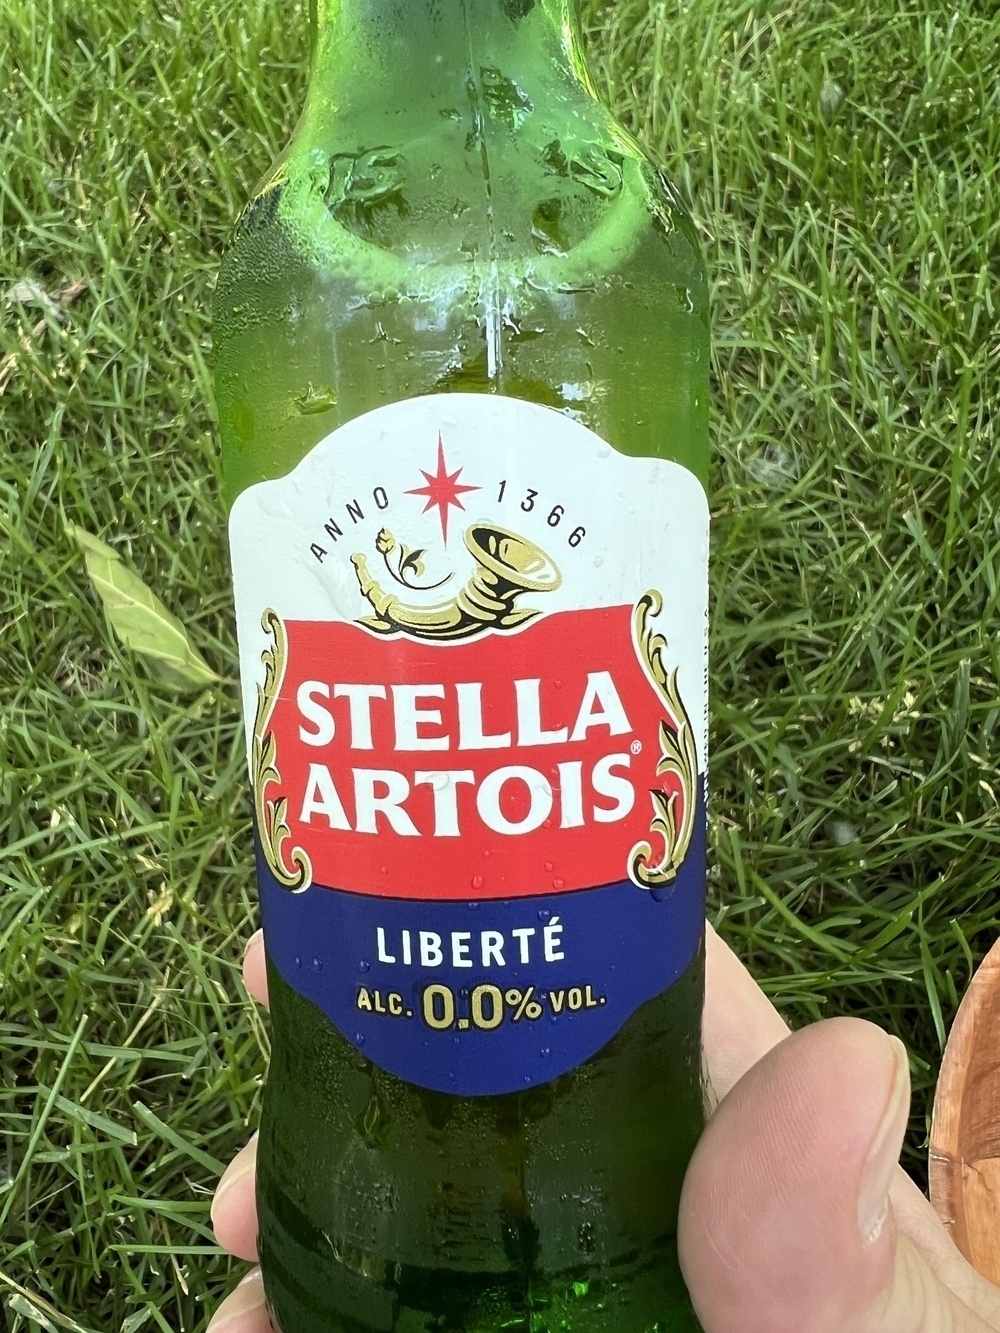 A hand is holding a bottle of Stella Artois Liberté, which is a non-alcoholic beer with 0.0% alcohol content, in front of a grassy background.